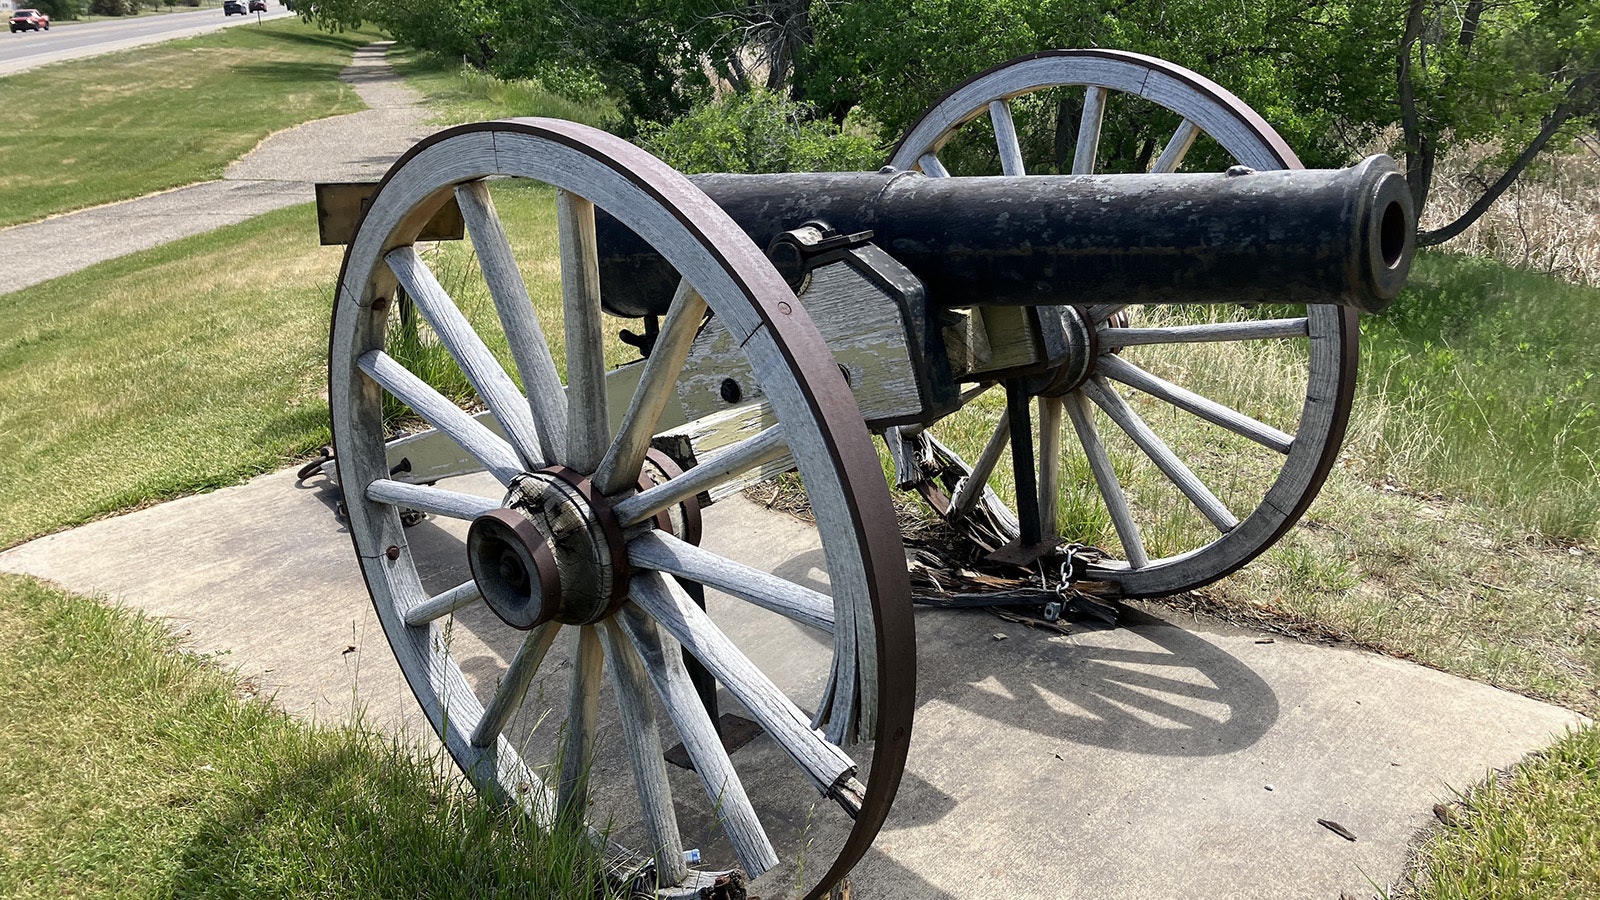 A cannon  located in a park just west of Casper’s downtown on the north side of the North Platte River may have been the one used to punch holes in the oil storage tanks in efforts to quench fires by raged in June 1921.